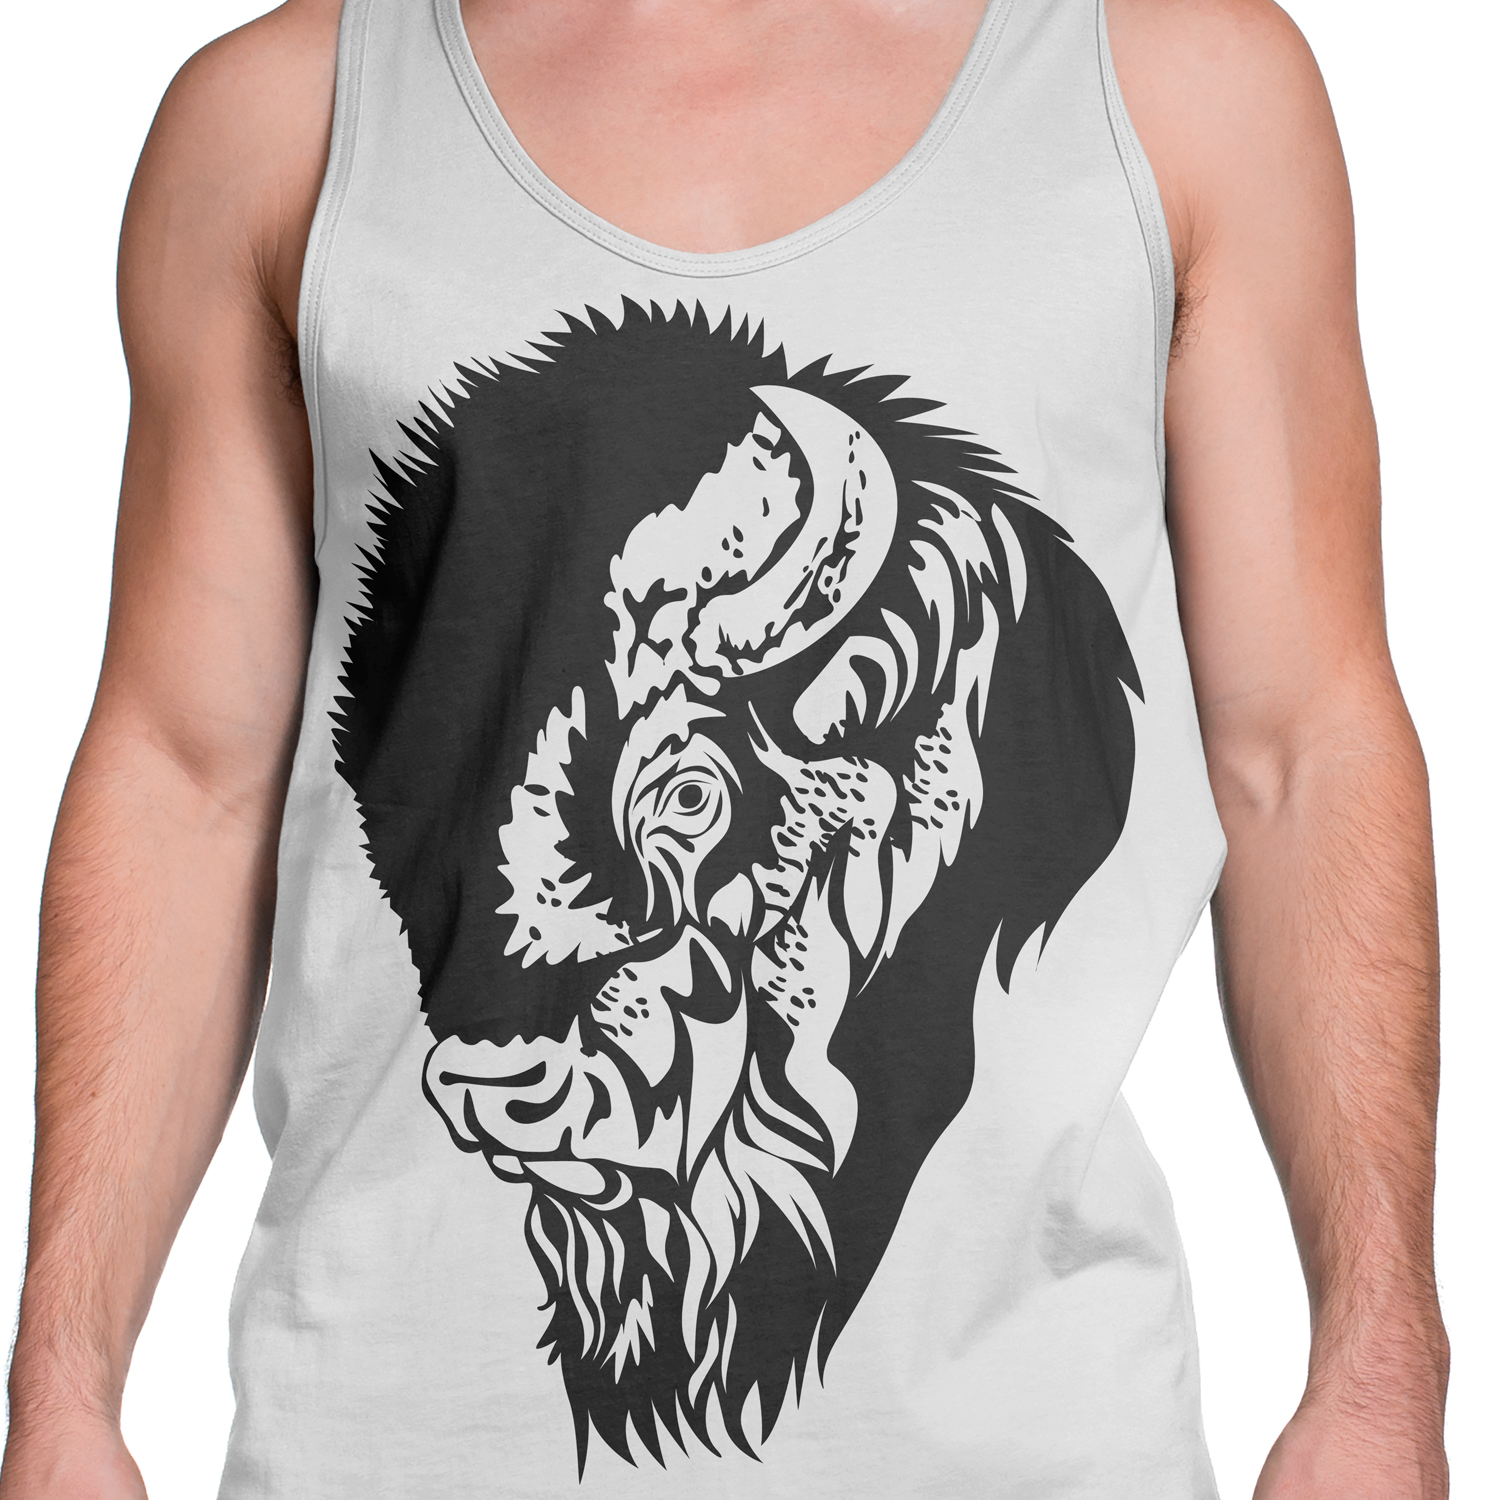 Man wearing a tank top with an image of a buffalo.